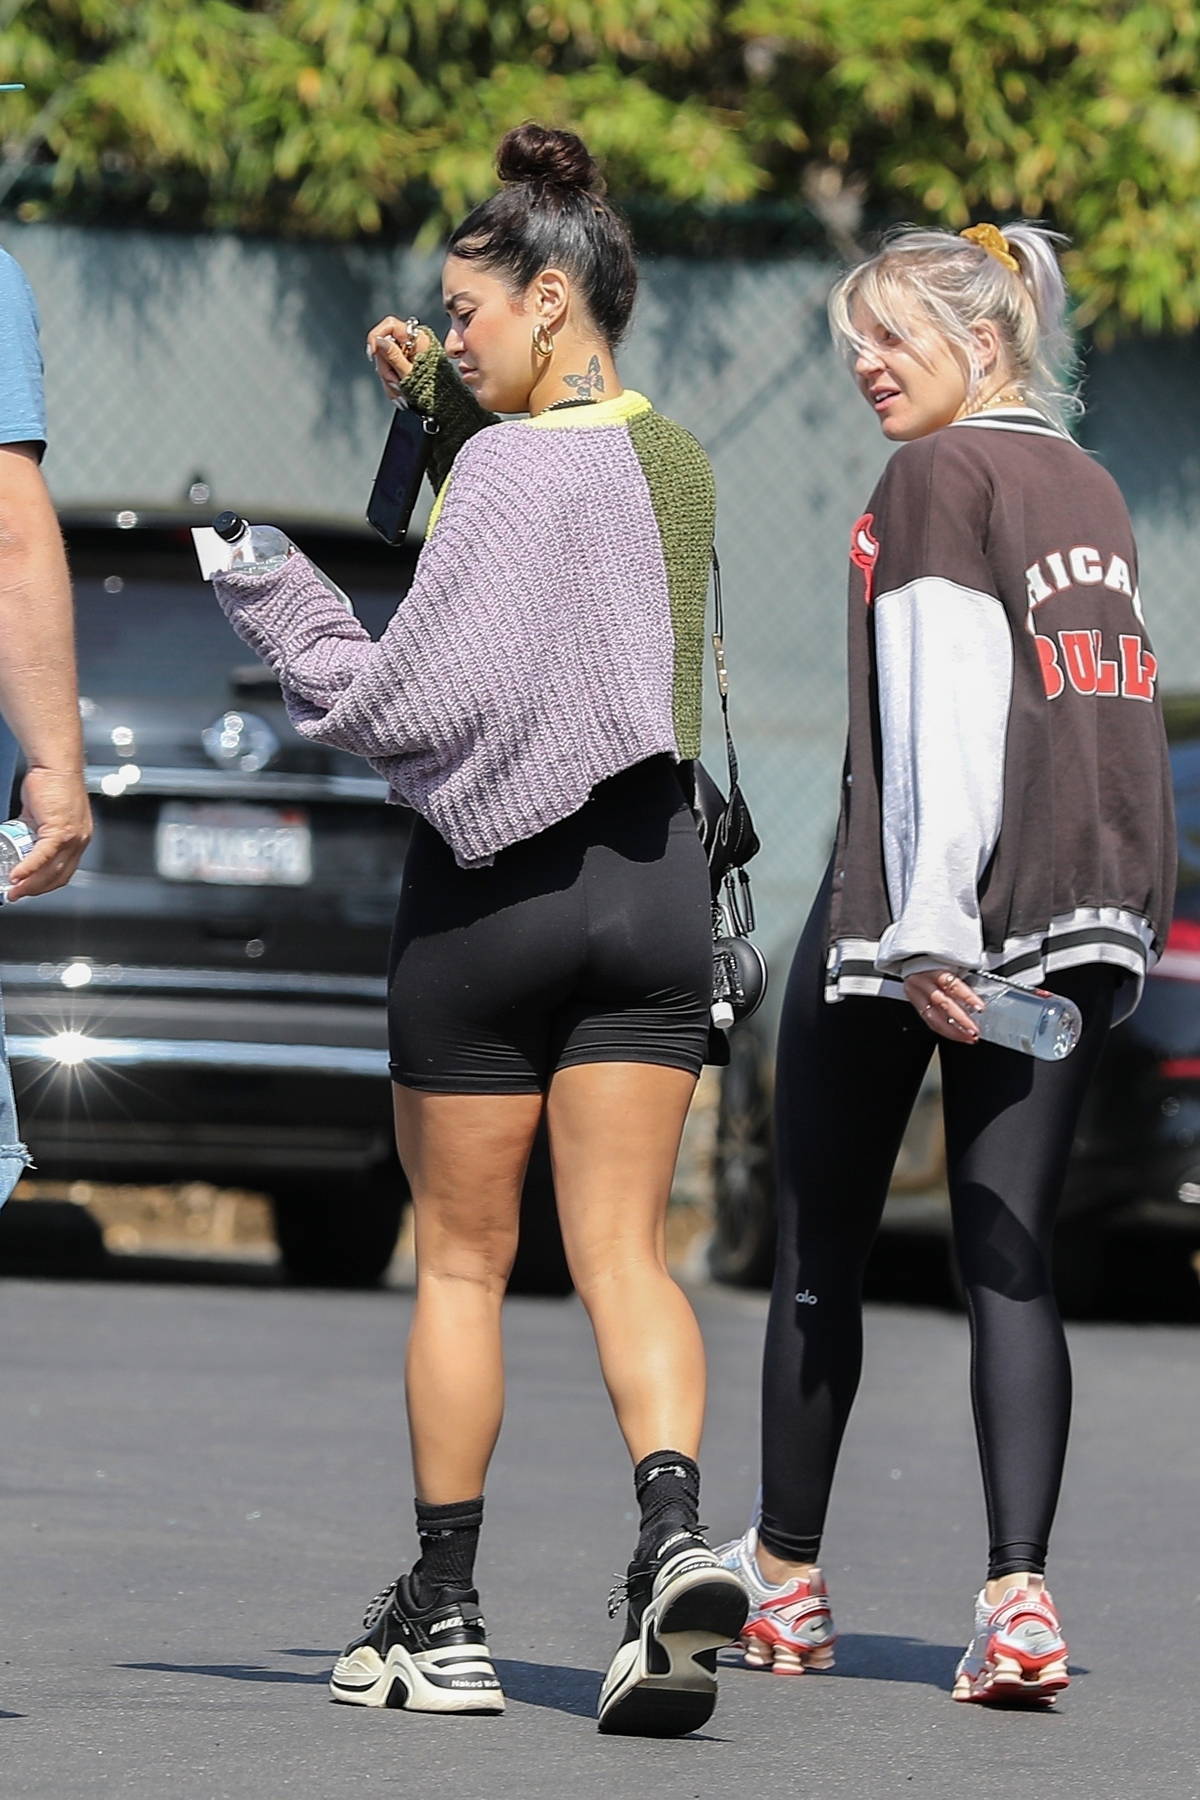 https://www.celebsfirst.com/wp-content/uploads/2021/06/vanessa-hudgens-sports-black-workout-top-and-legging-shorts-as-she-hits-the-gym-in-west-hollywood-california-030621_8.jpg